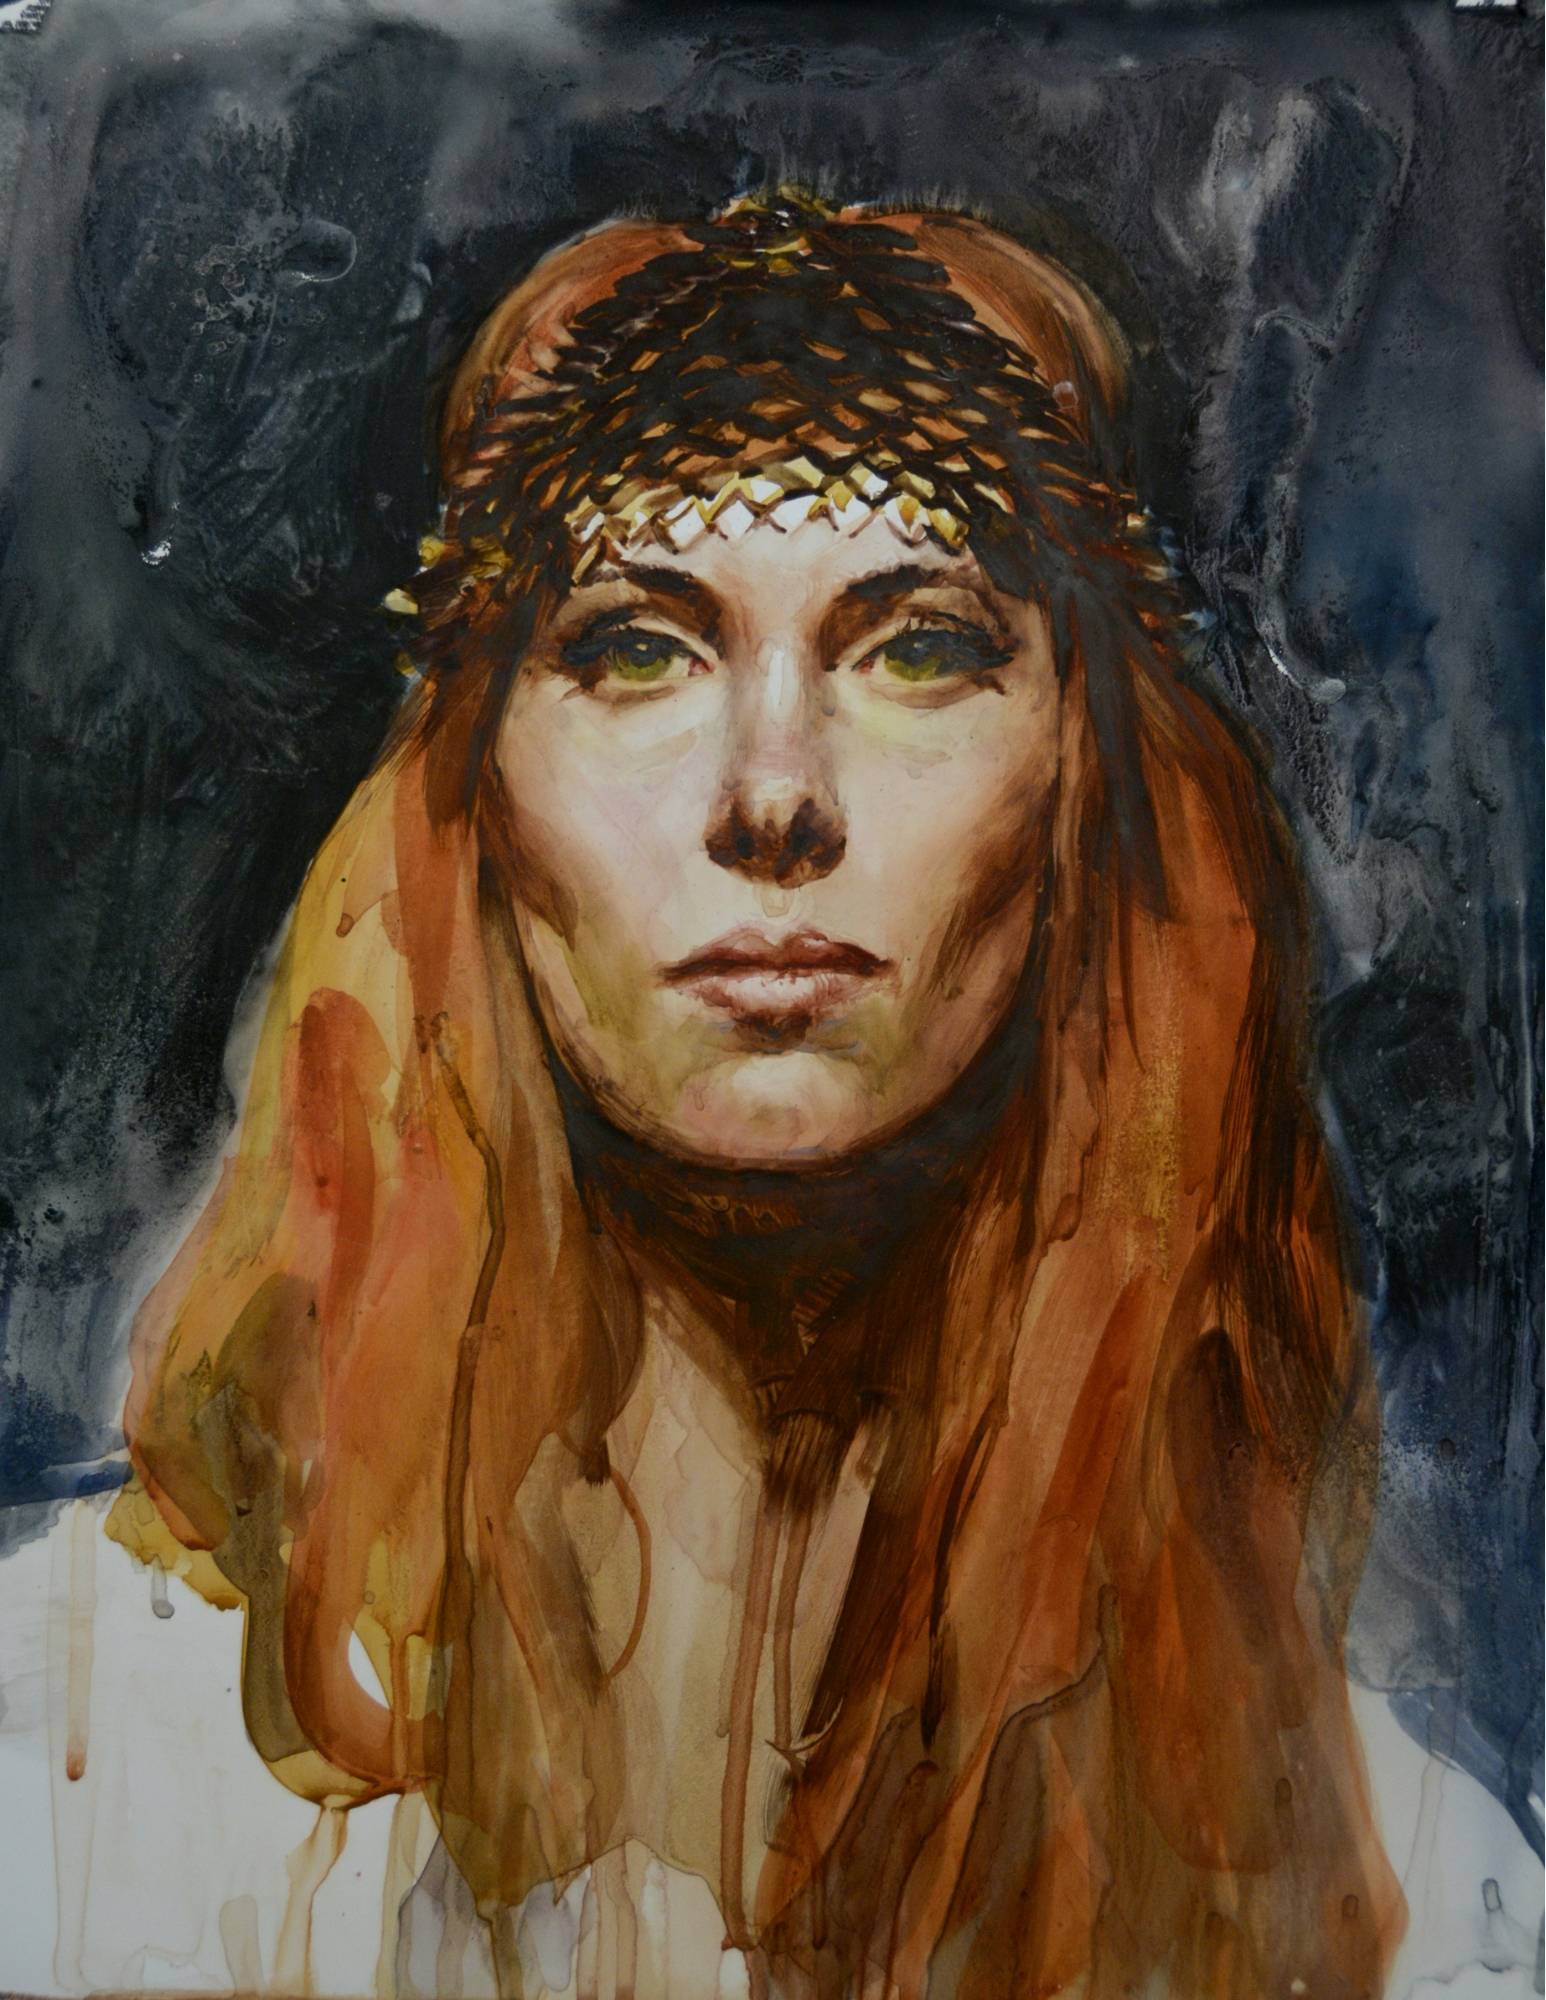 watercolor portrait of a redhead with head and hair dominating the composition